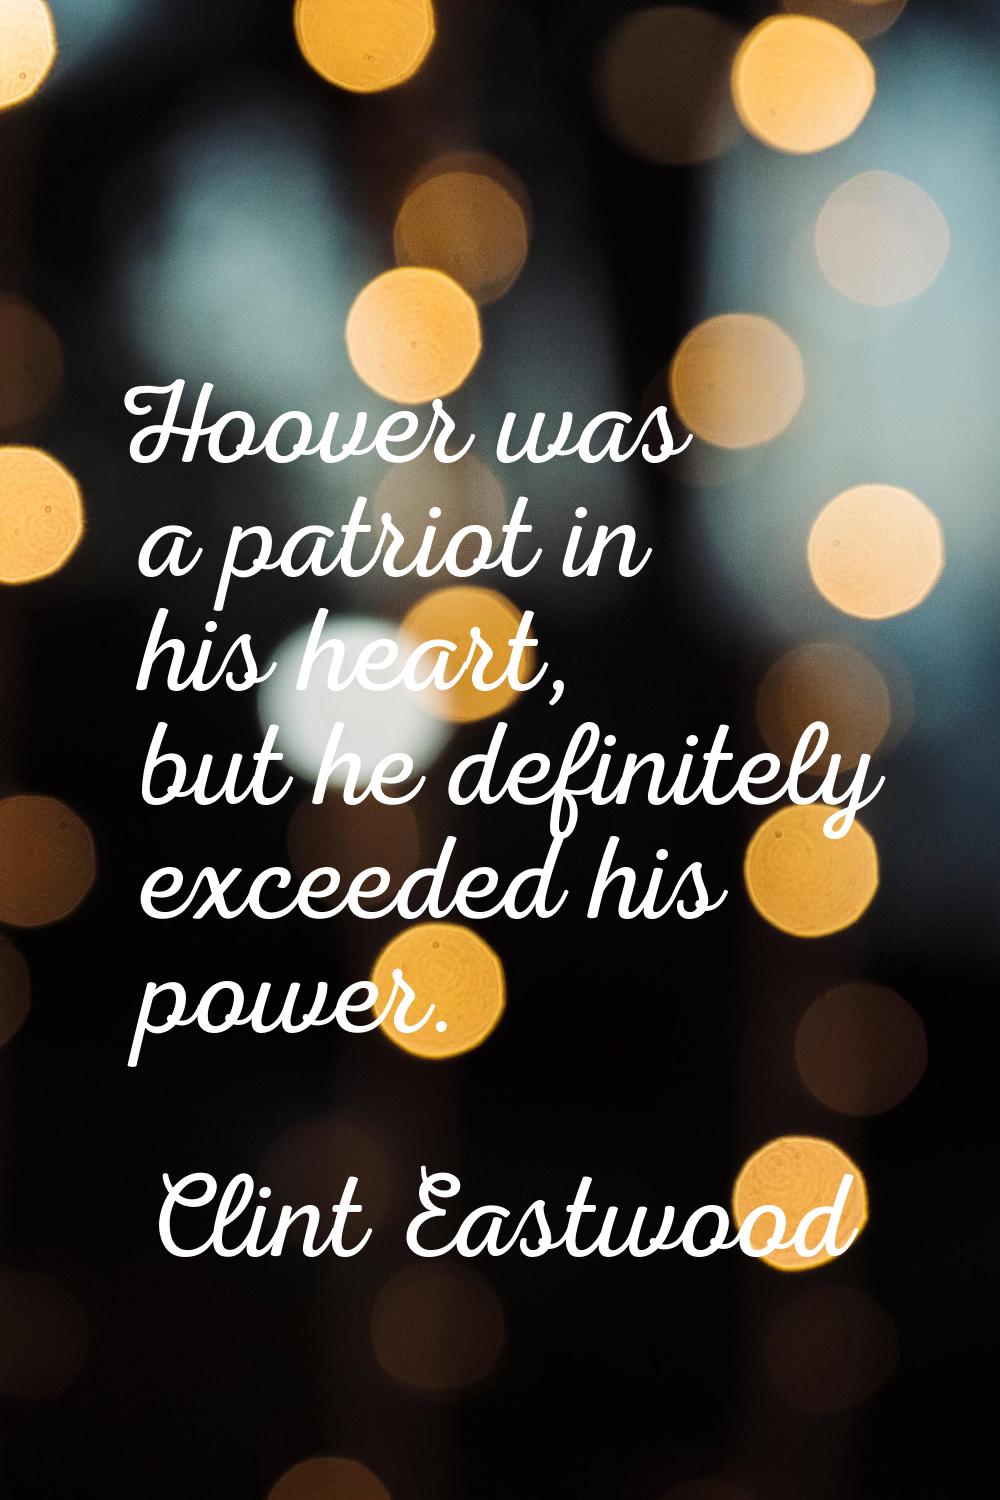 Hoover was a patriot in his heart, but he definitely exceeded his power.